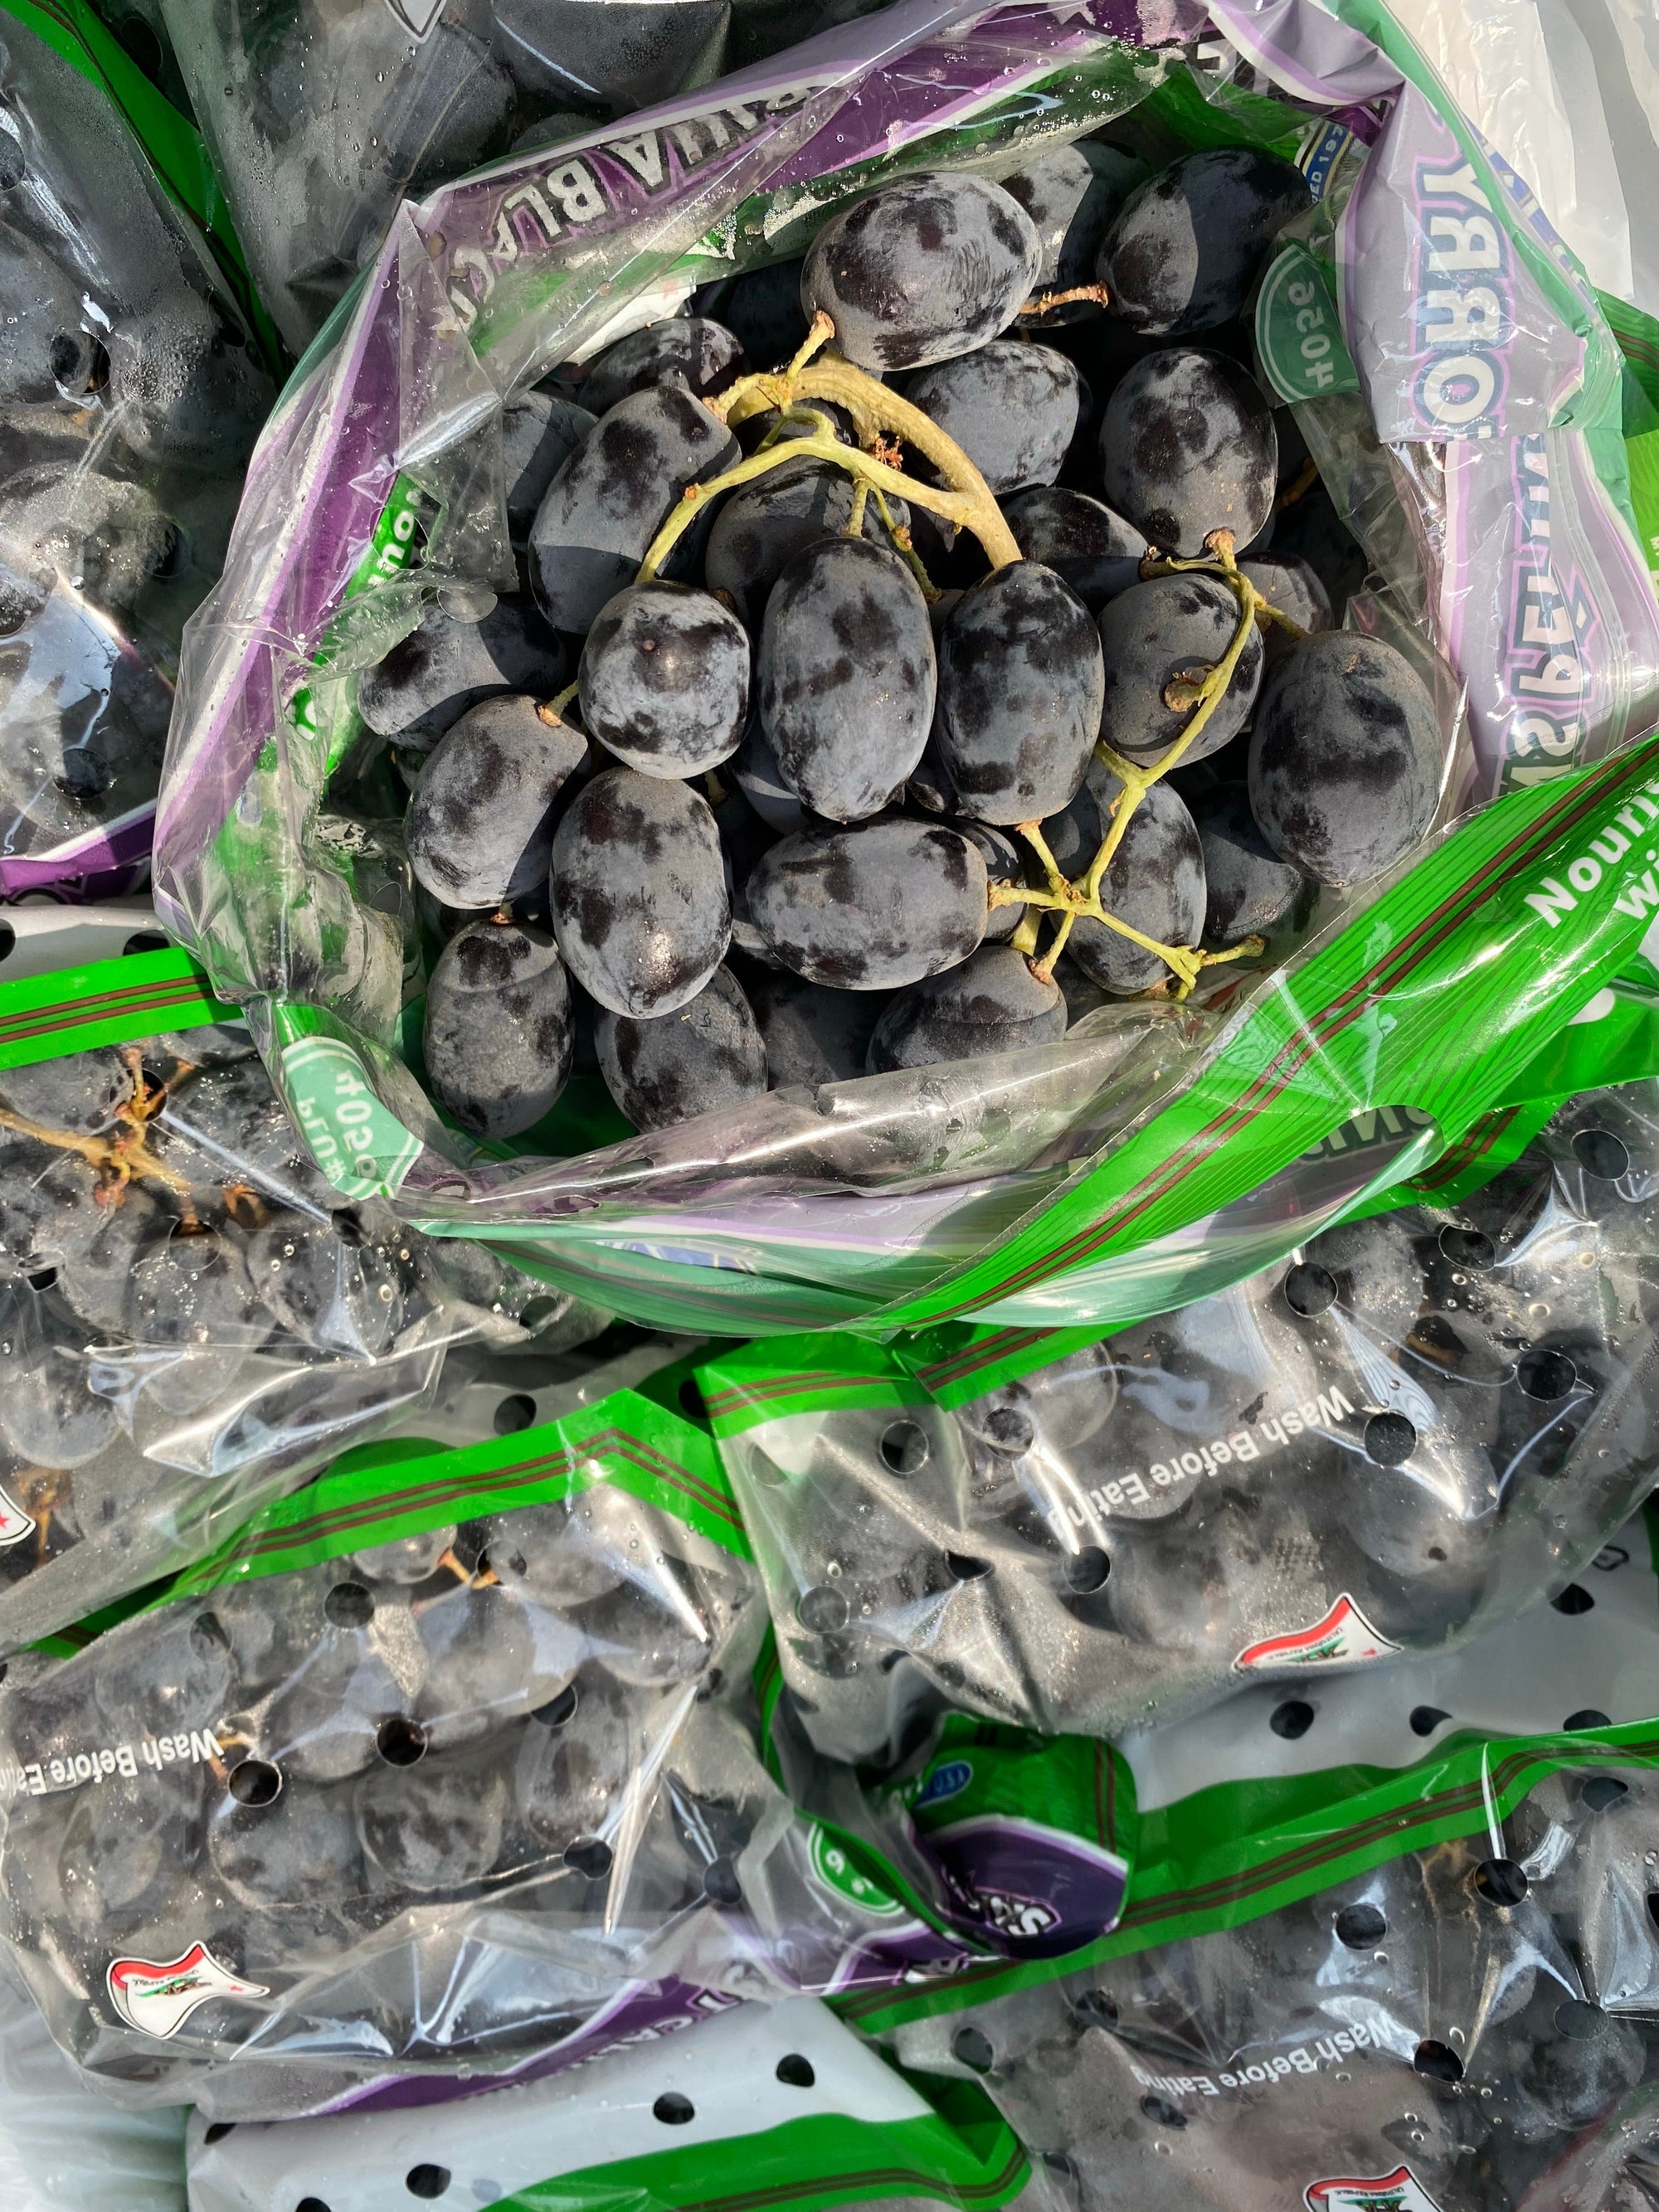 Buy 2 Aussie Airflown Black Seedless Grapes for only Php 900